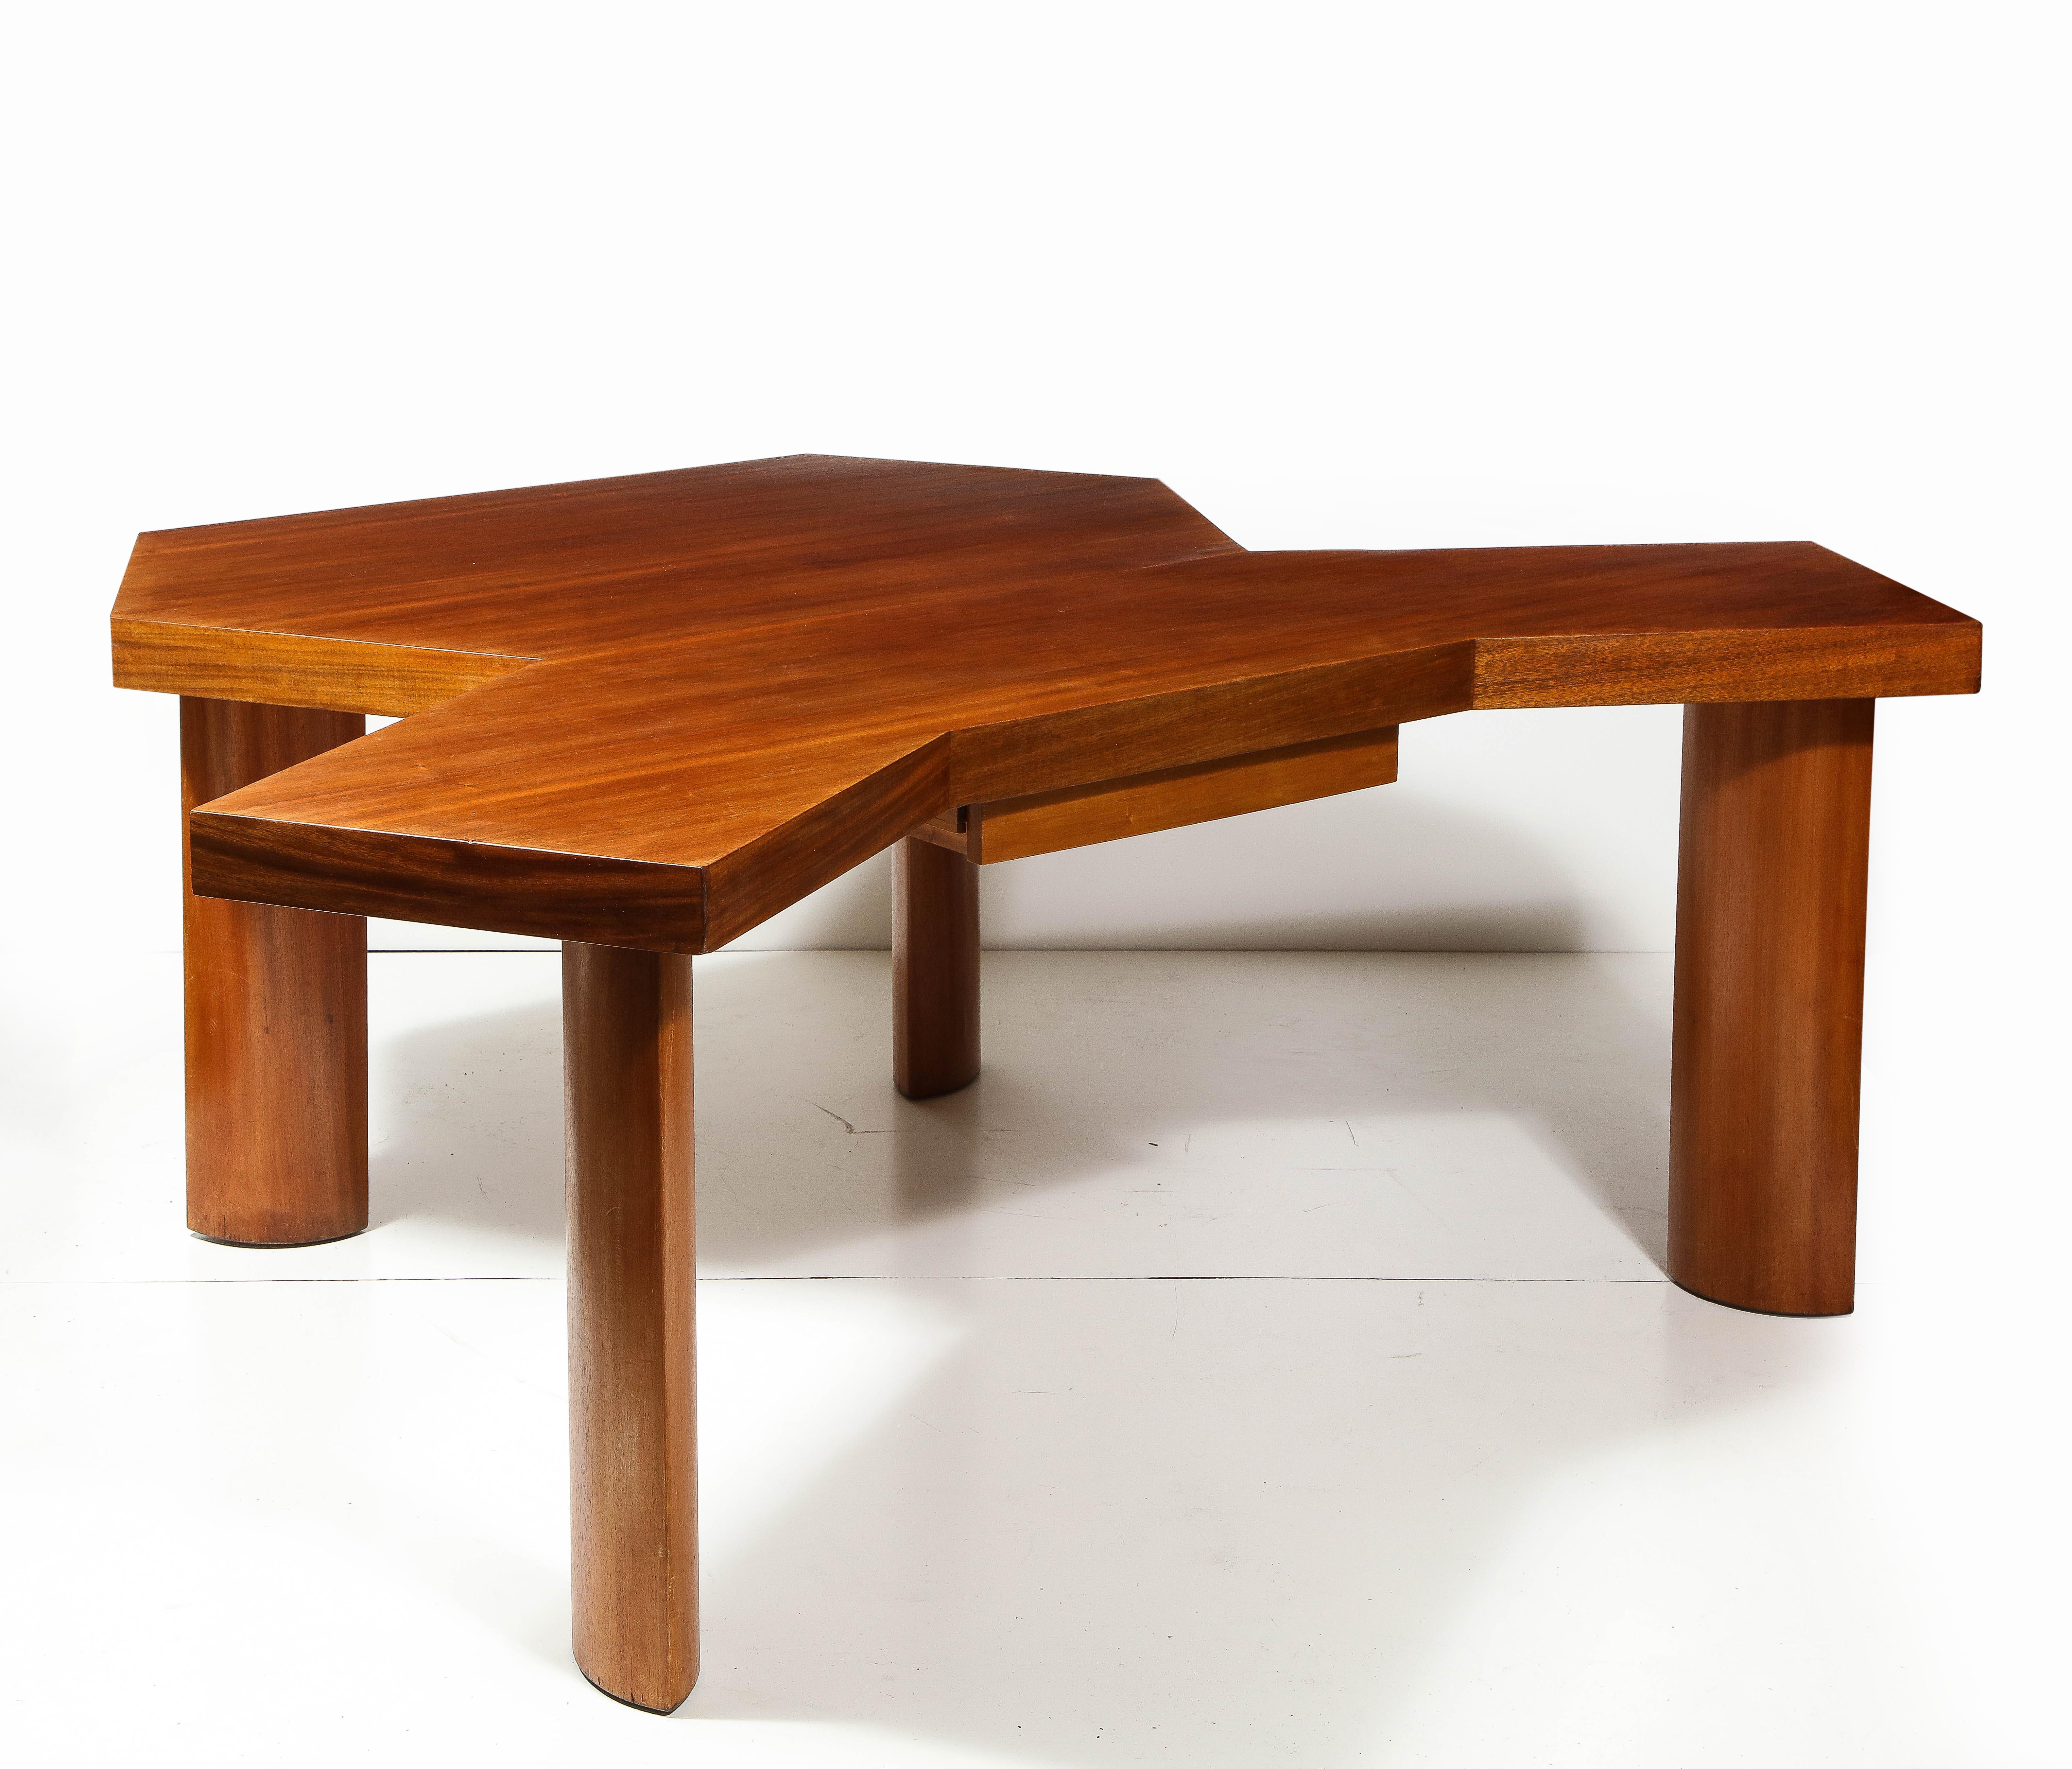 Unique, impressive desk in the manner of Charlotte Perriand. The beautifully aged, warm-toned elm lends itself beautifully to the organic yet defined shapes of the double desk top and sculpted legs. 

